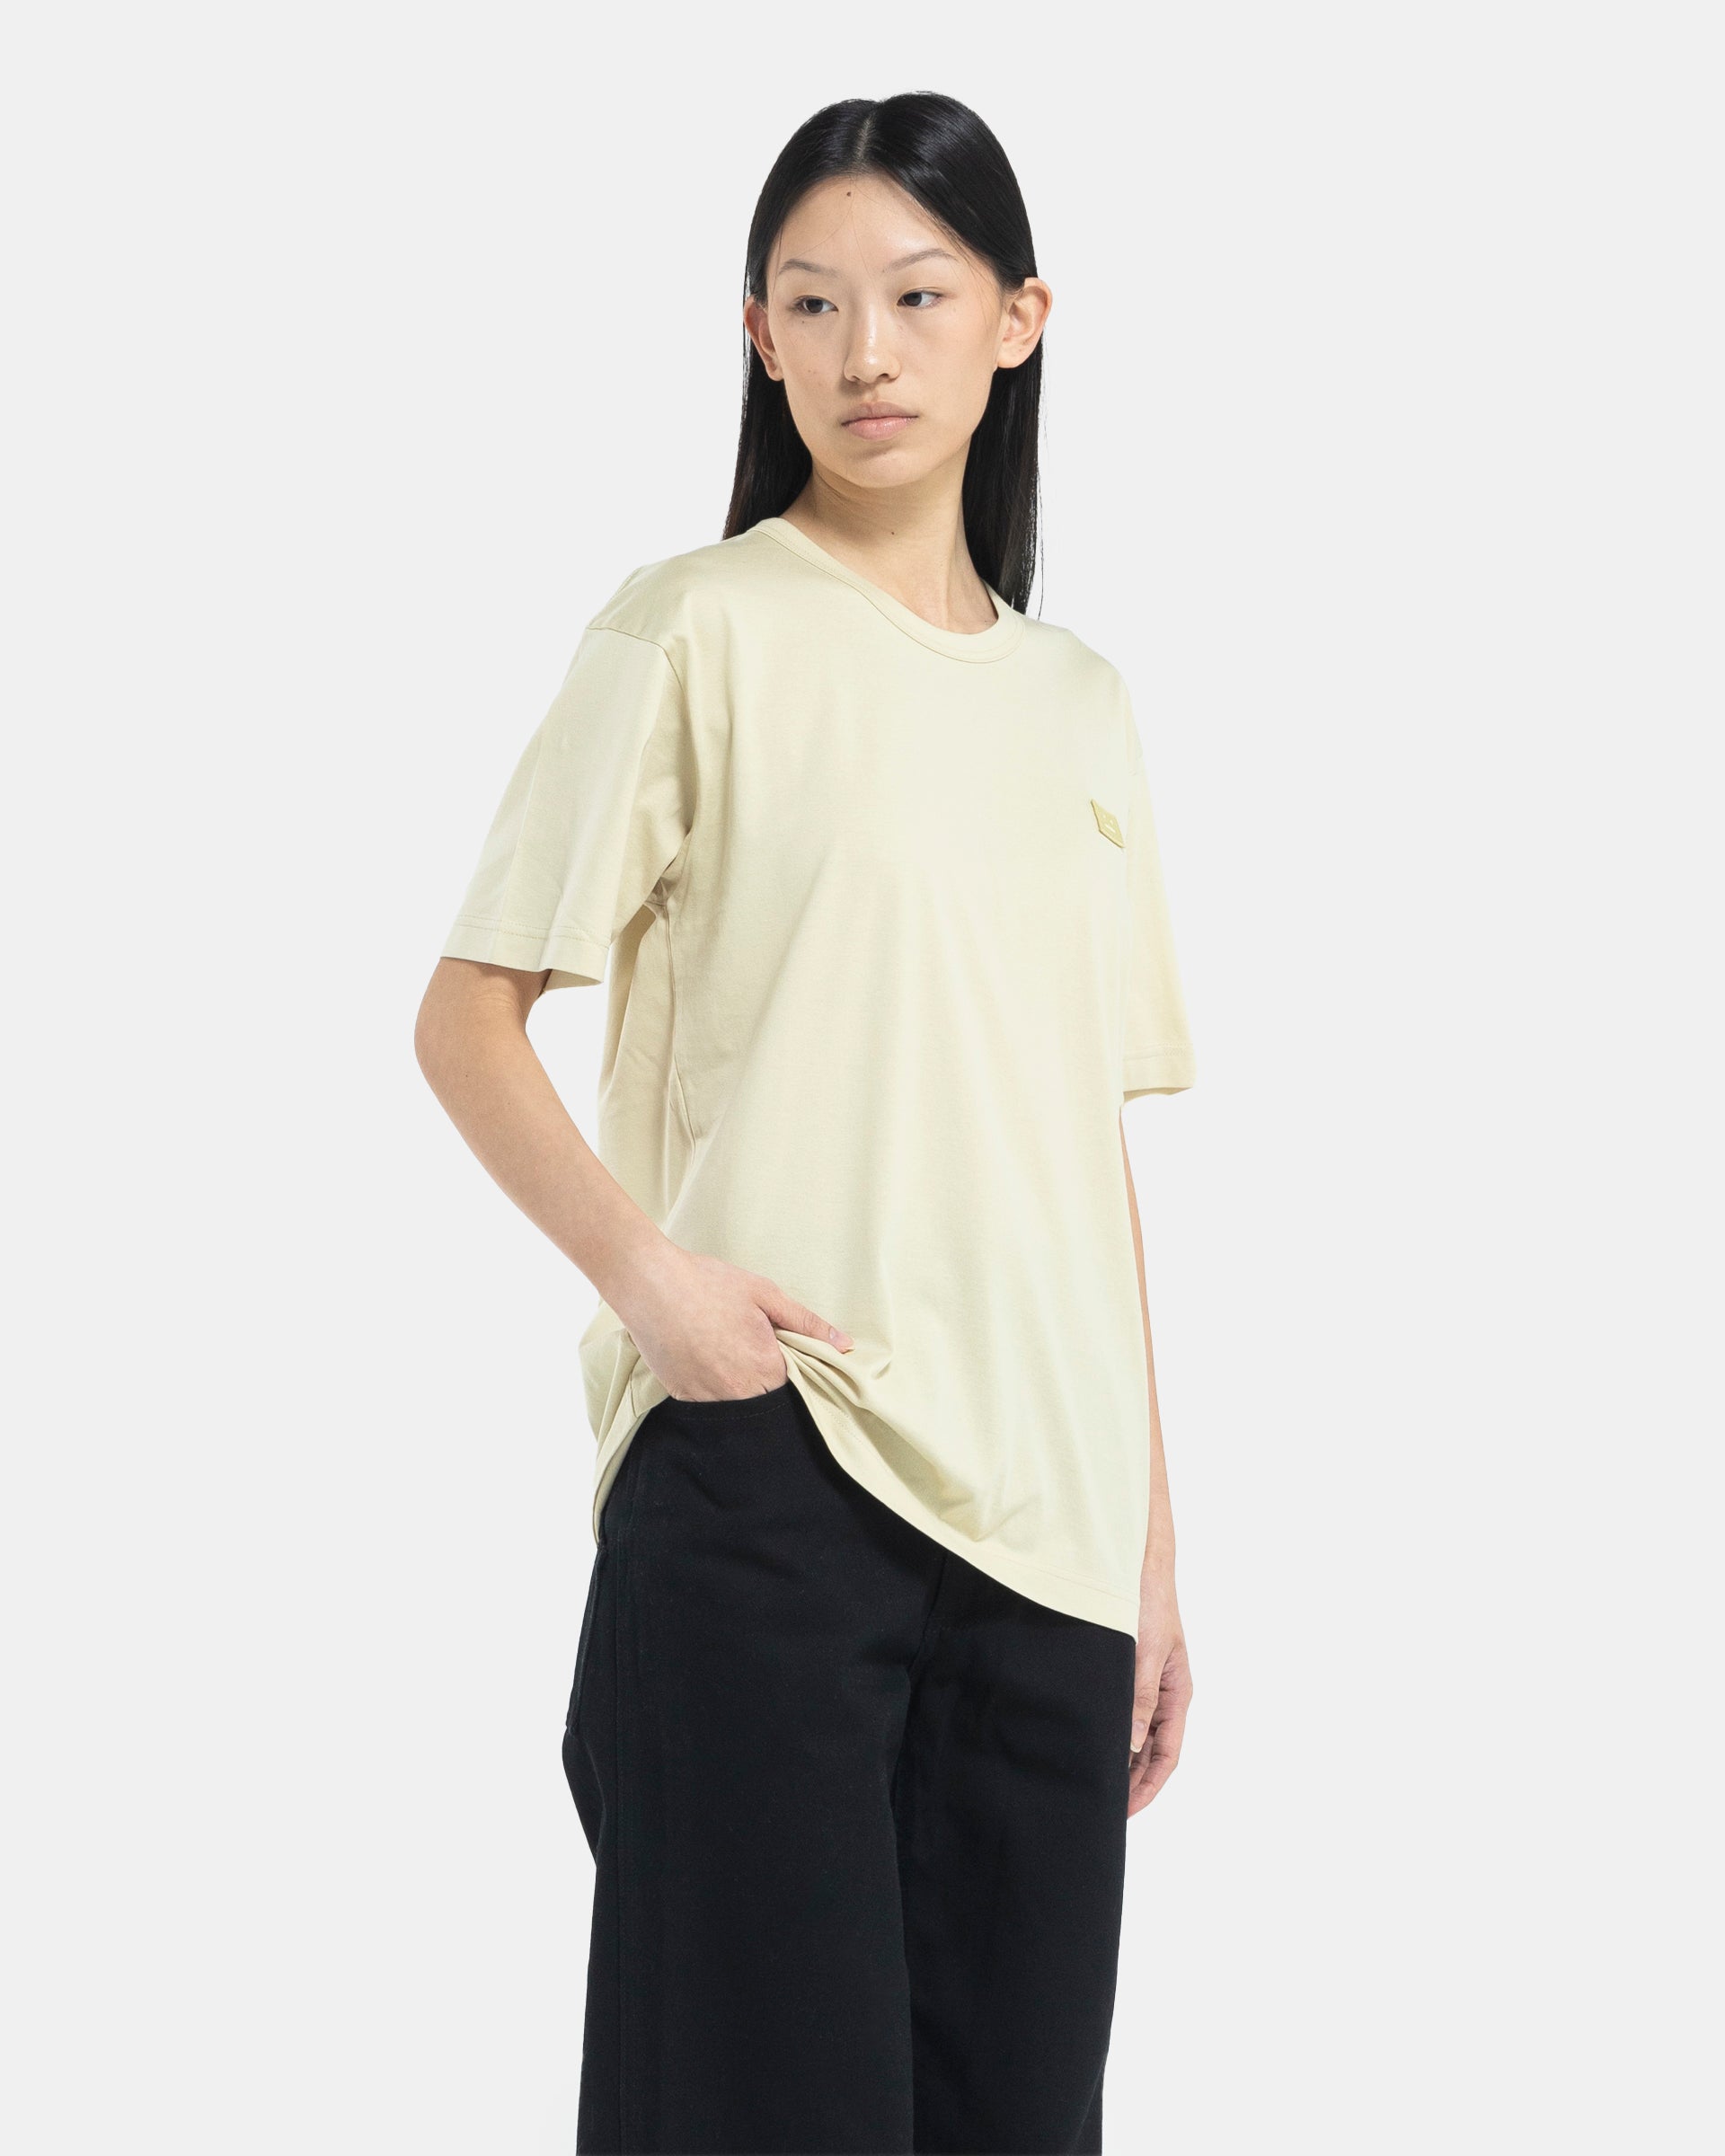 Crew Neck T-Shirt in Sand and Green